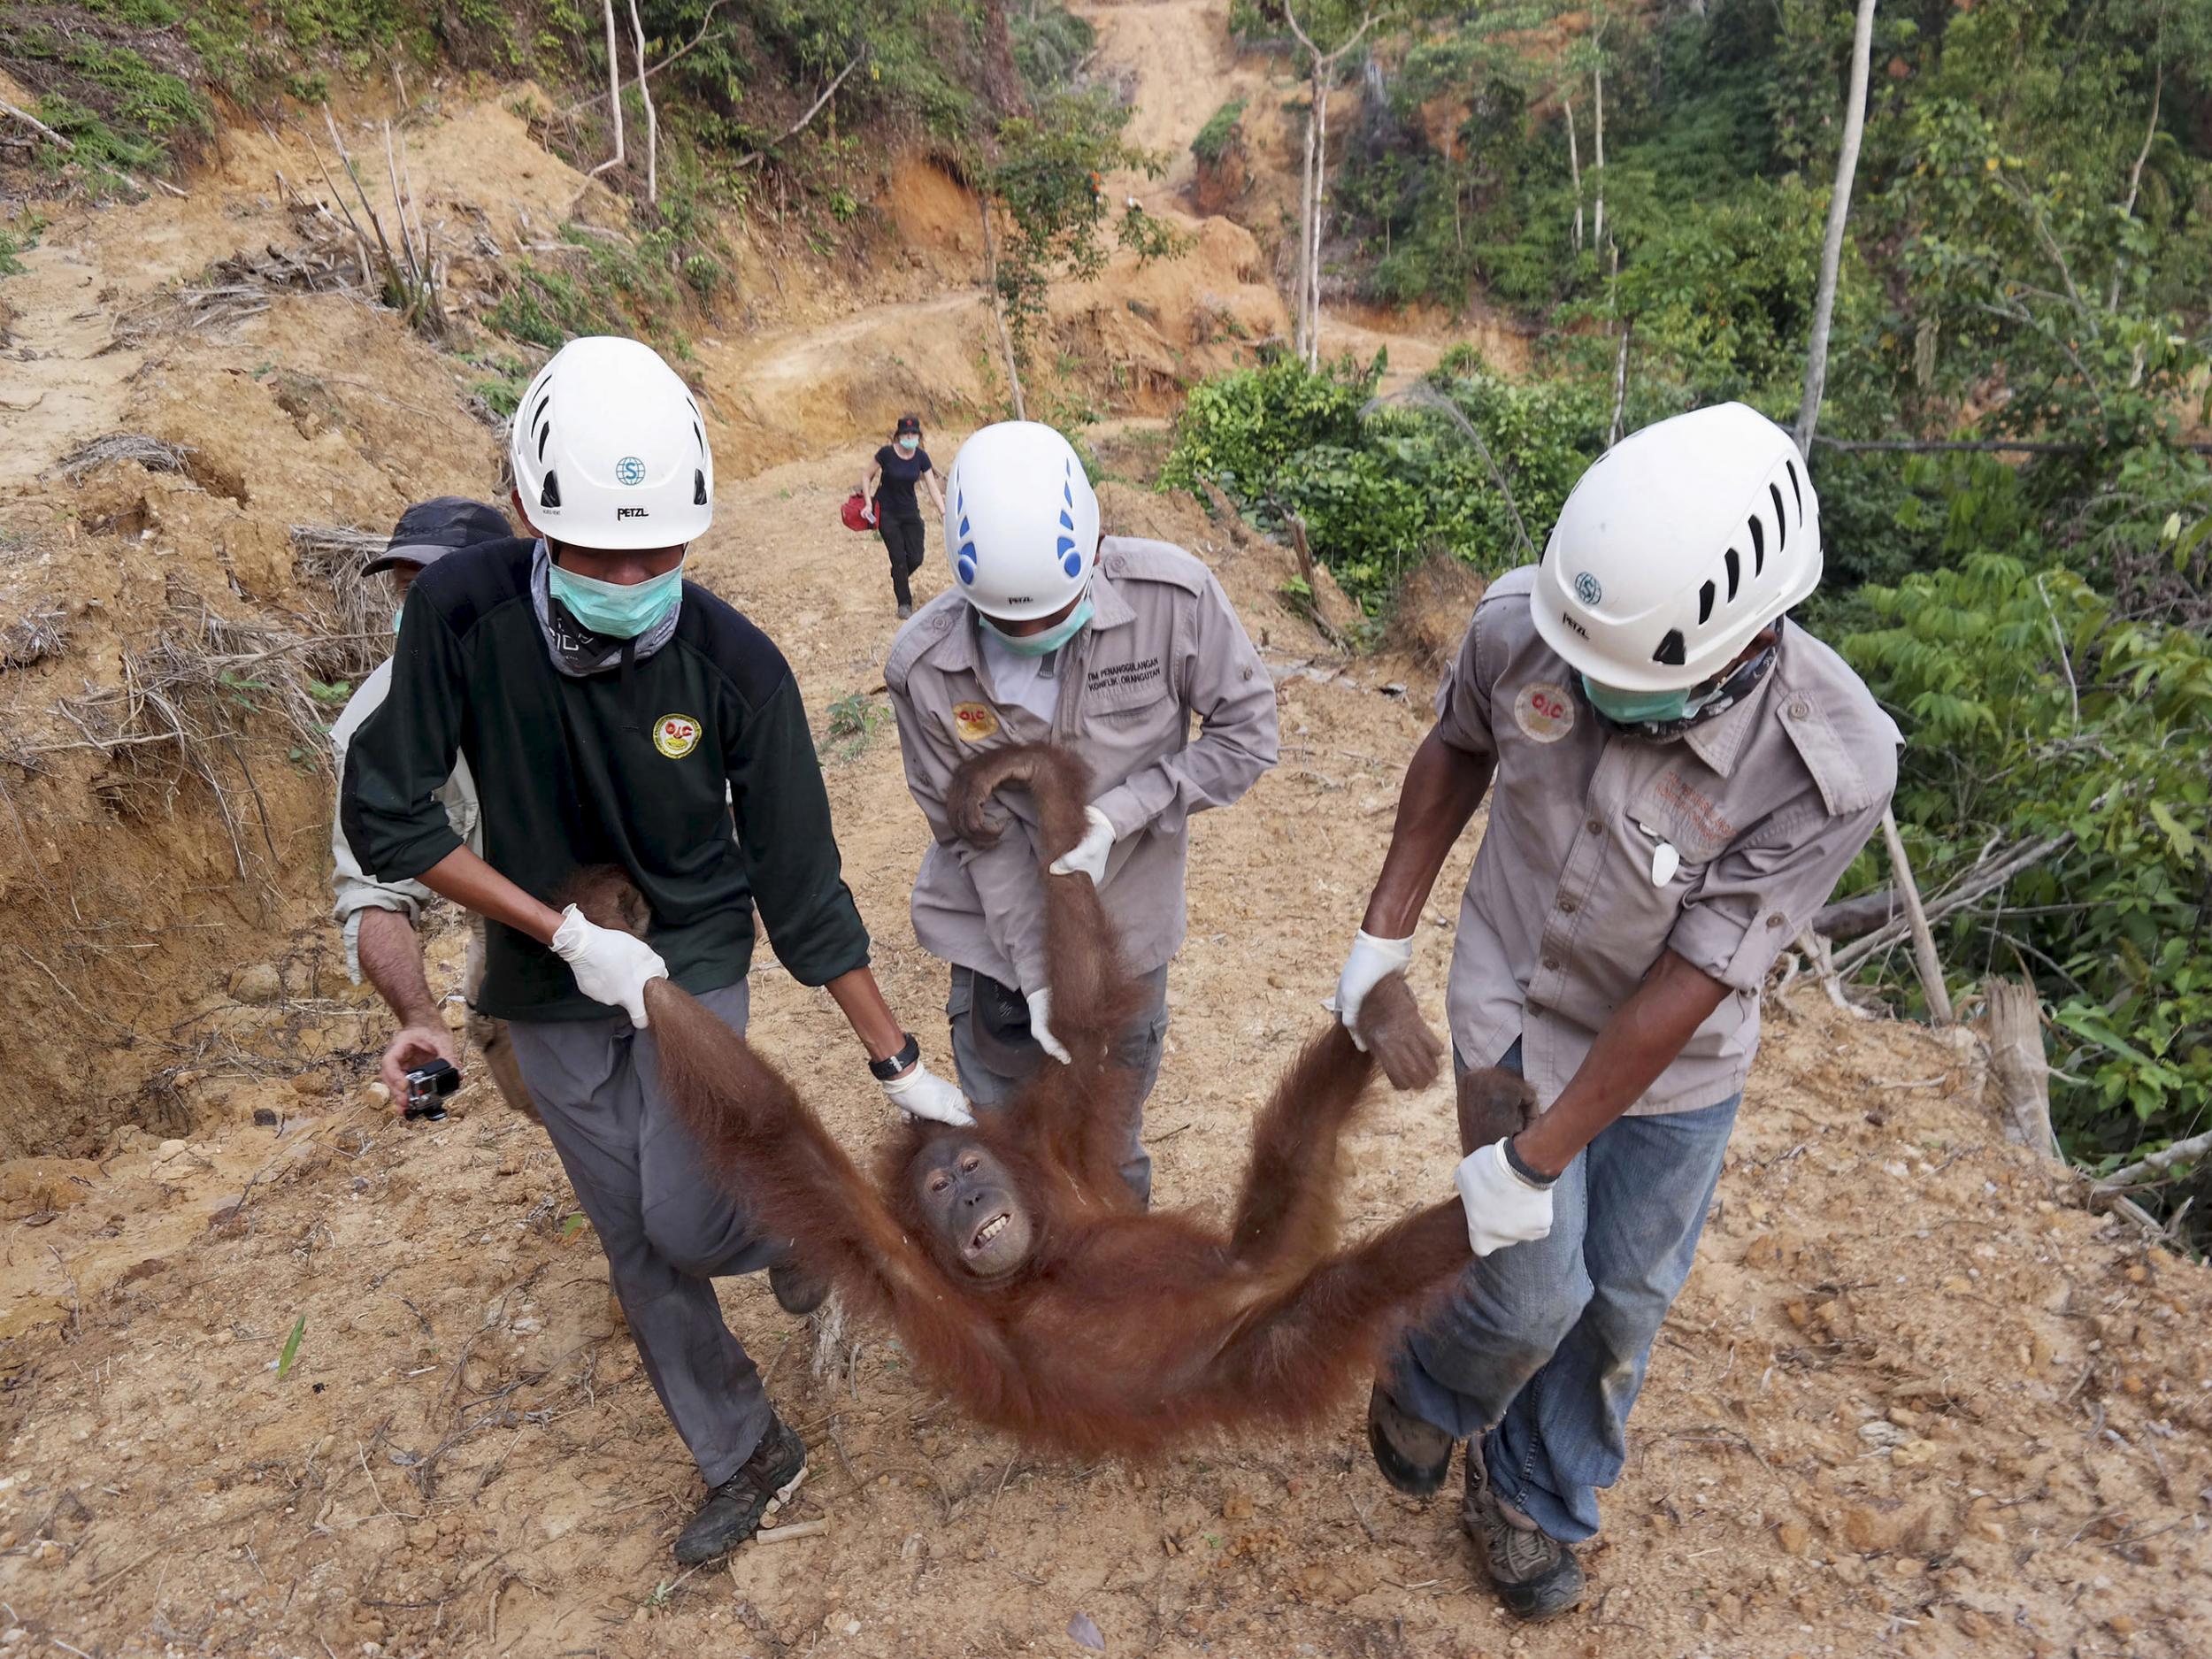 Conservationists rescue a female orangutan found isolated in a palm-oil plantation in North Sumatra, Indonesia